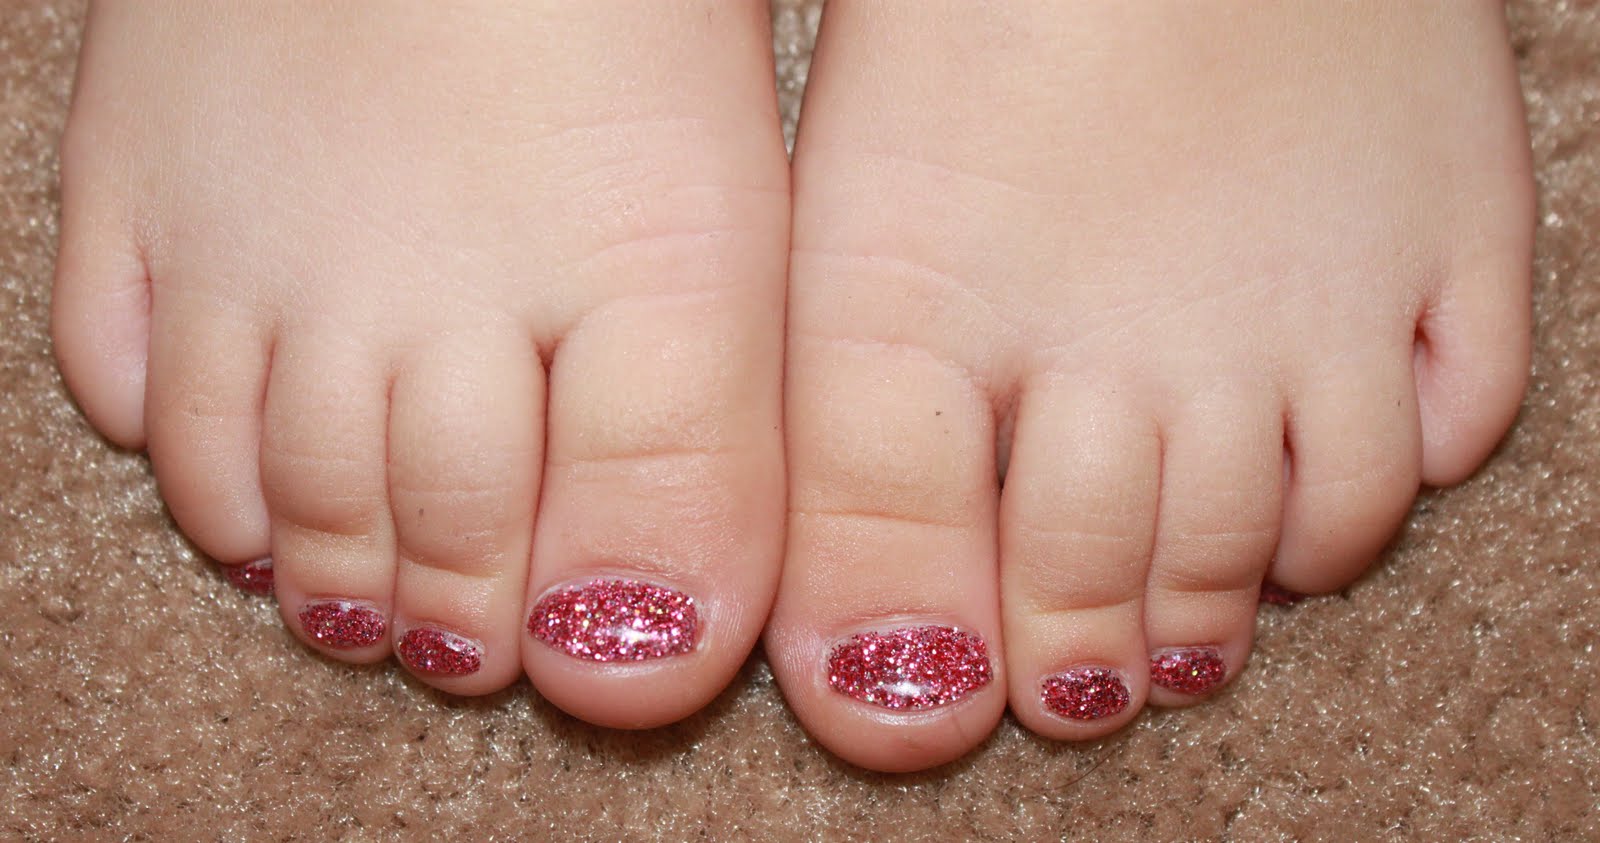 Toes Stock Photos & Pictures. Royalty Free Toes Images And ...